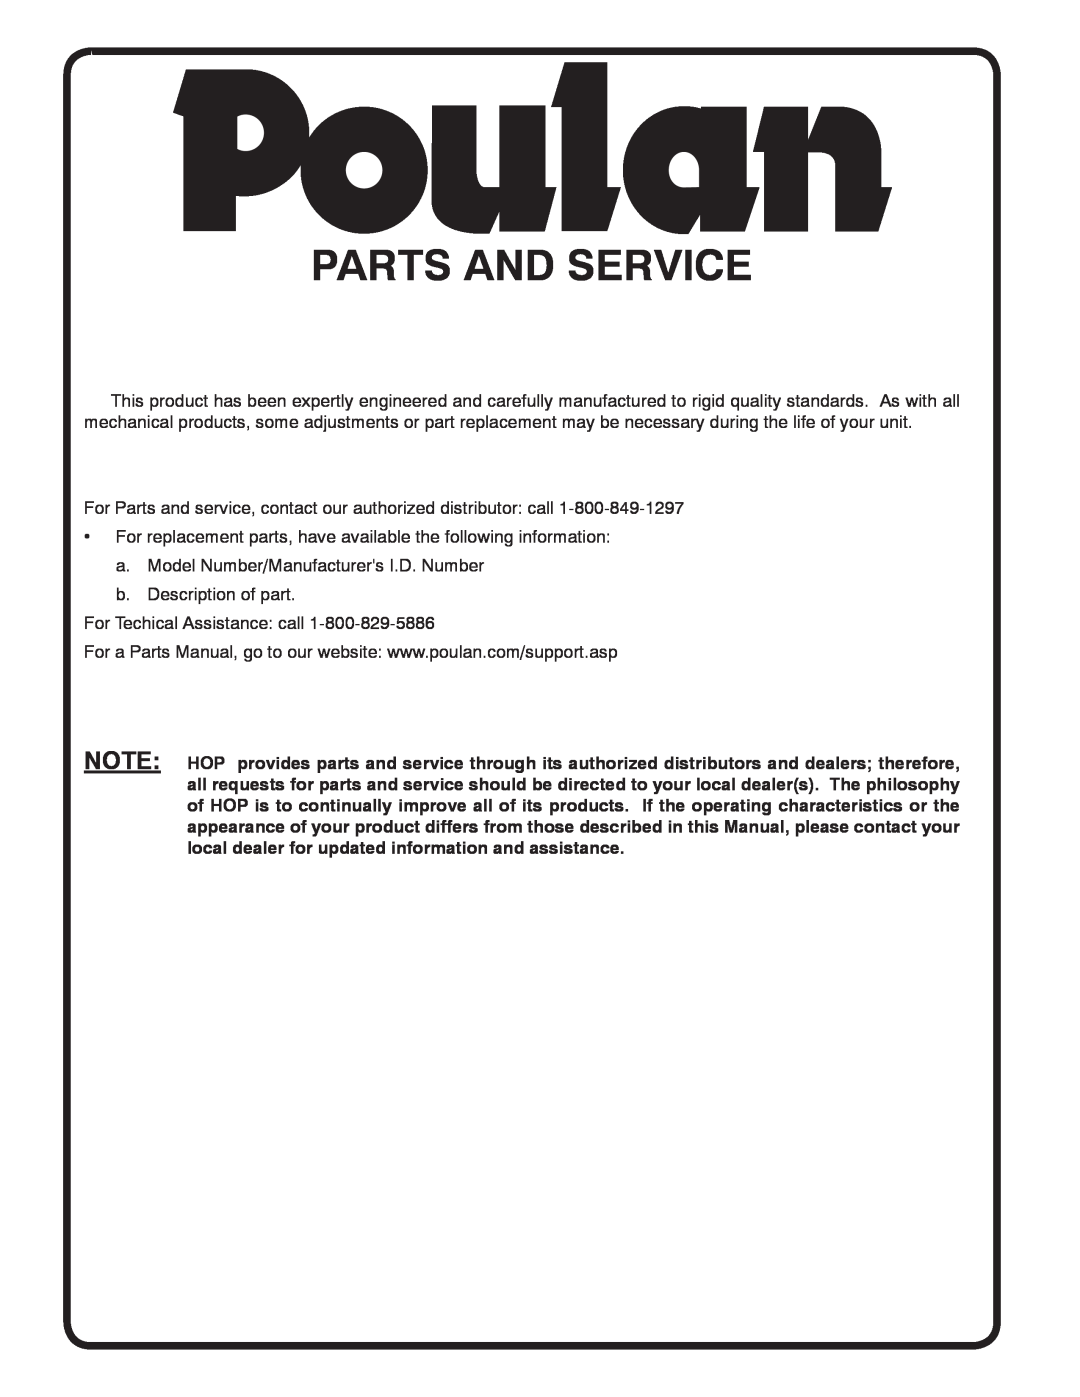 Poulan 419450 manual Parts And Service 